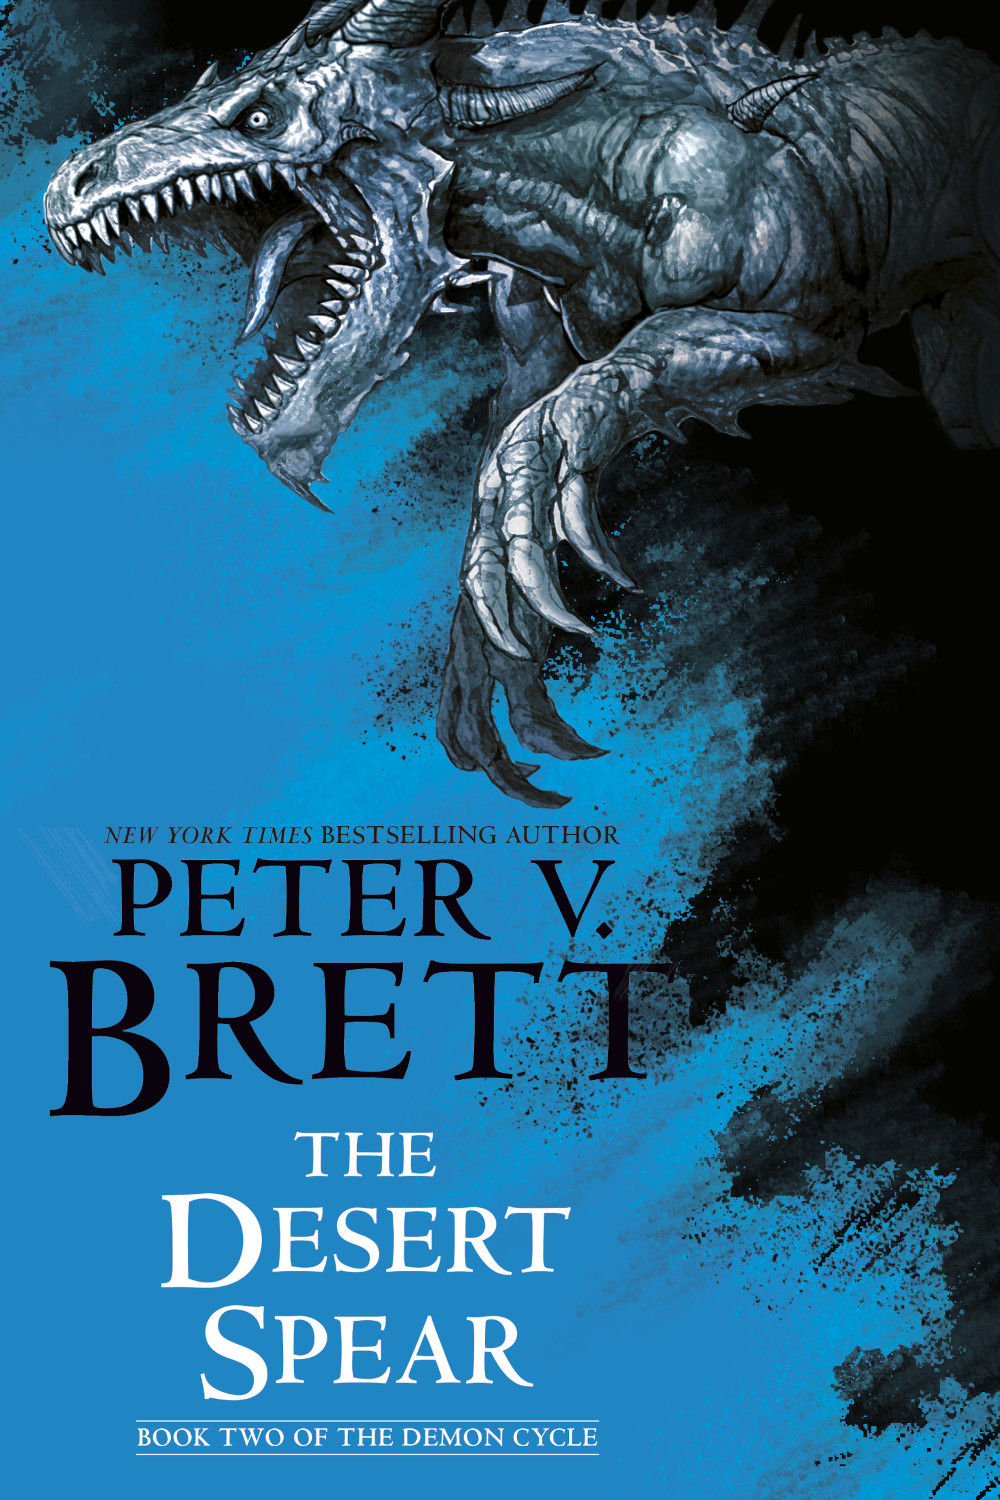 The Warded Man by Peter V. Brett, Book One of The Demon Cycle (US cover)